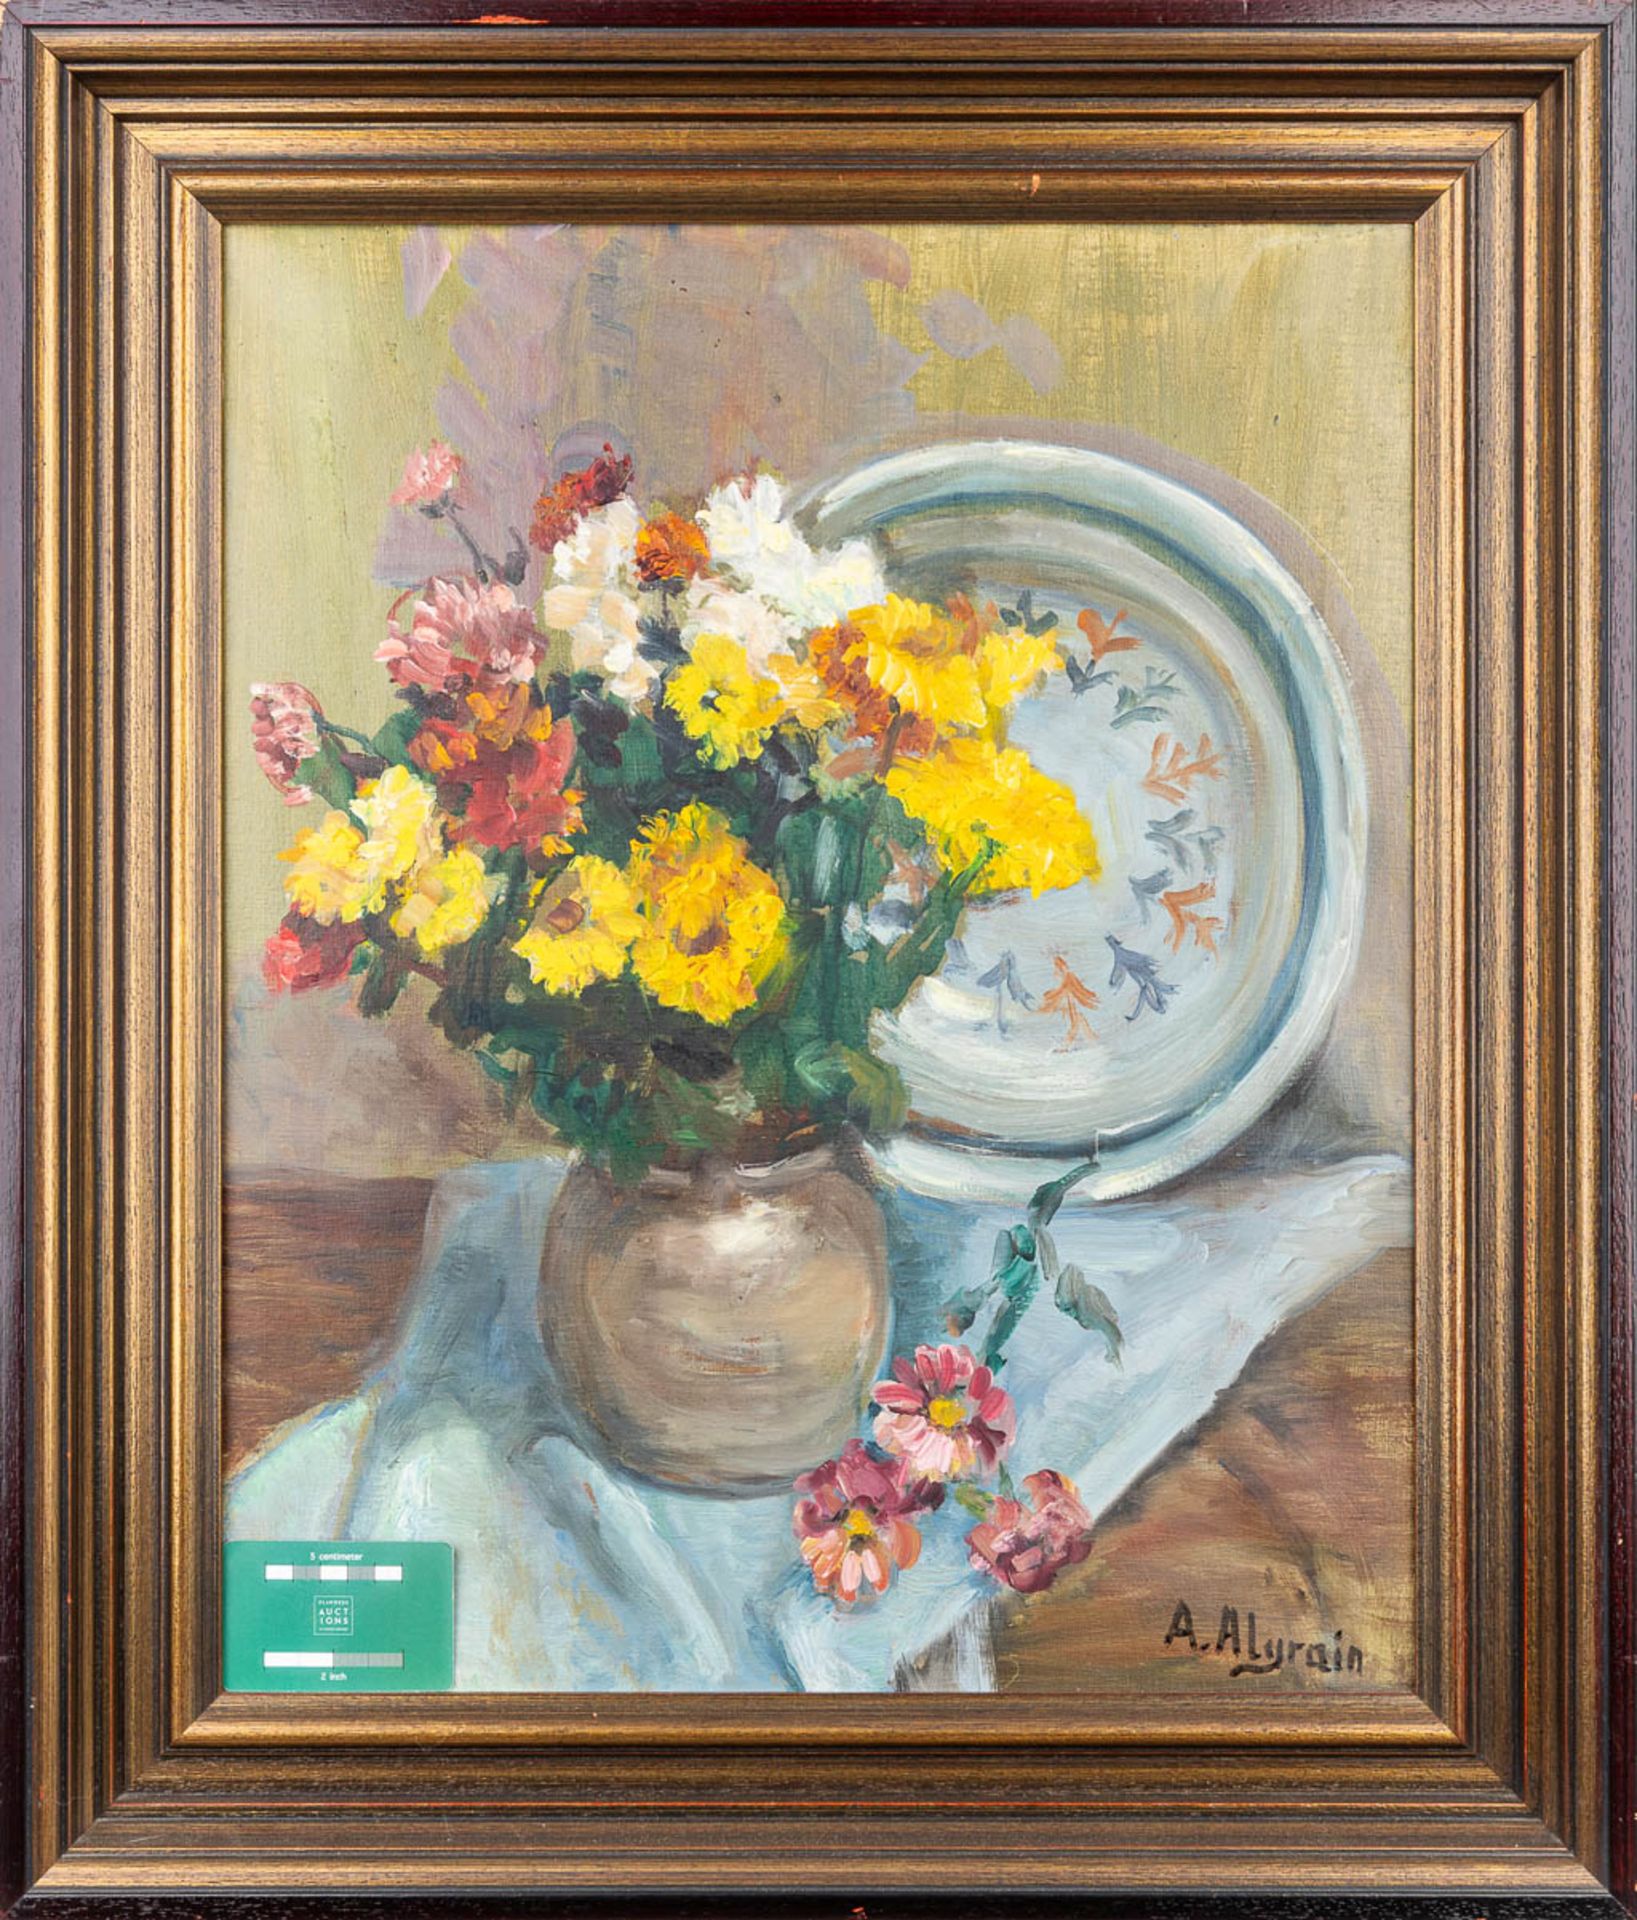 Andrée ALGRAIN (1905-1999) 'Still life' a painting, oil on canvas. (45 x 55 cm) - Image 6 of 8